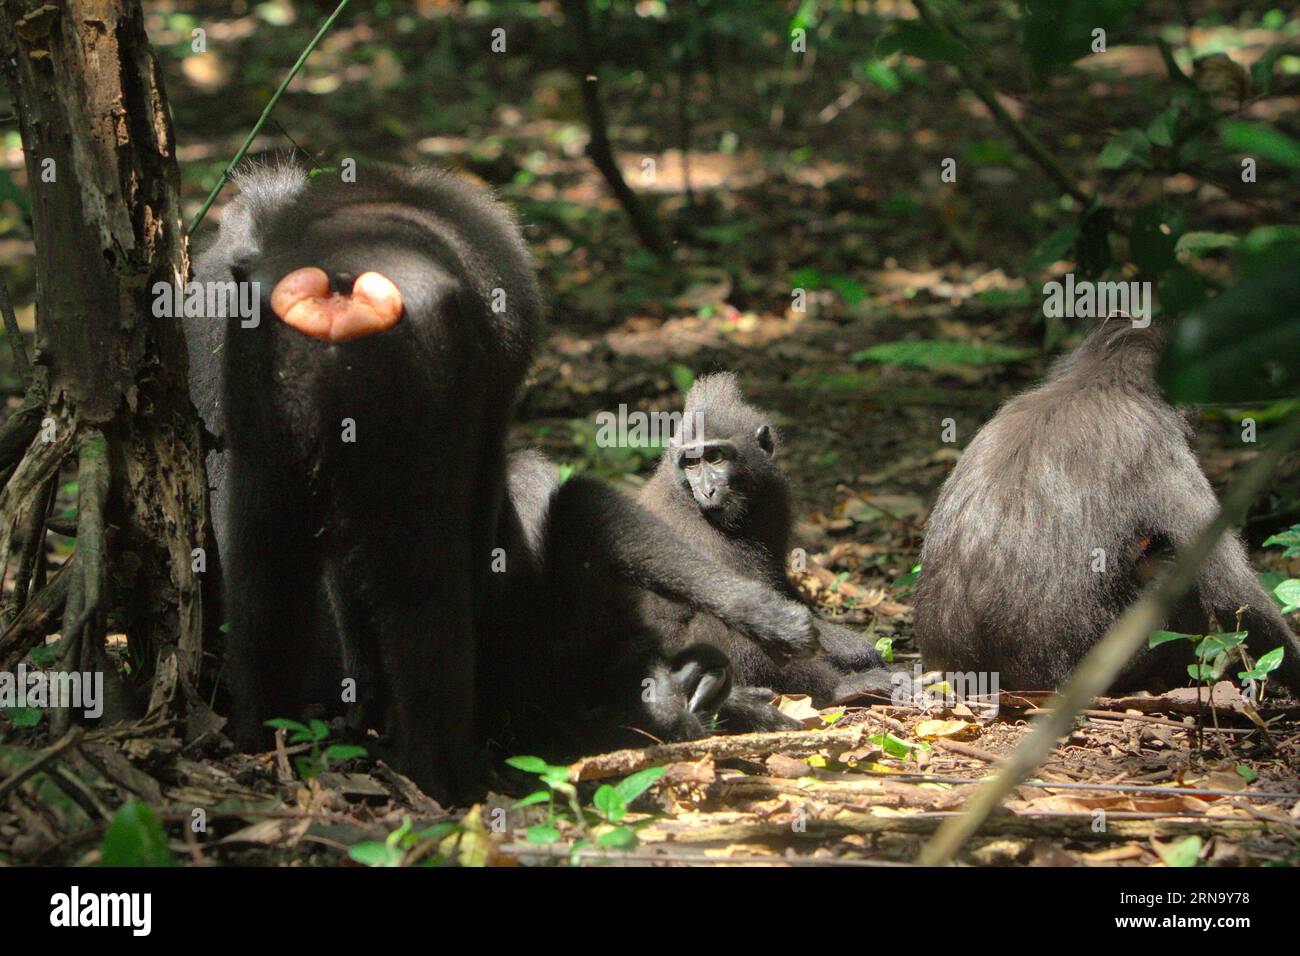 A group of crested macaques (Macaca nigra) in Tangkoko forest, North Sulawesi, Indonesia. Climate change and disease are emerging threats to primates, while crested macaque belongs to the 10% of primate species that are highly vulnerable to droughts. A recent report revealed that the temperature is indeed increasing in Tangkoko forest, and the overall fruit abundance decreased. Macaca nigra is considered a key species in their habitat, an important 'umbrella species' for biodiversity conservation. Their presence is a good indicator of the current health of the ecosystem. Stock Photo